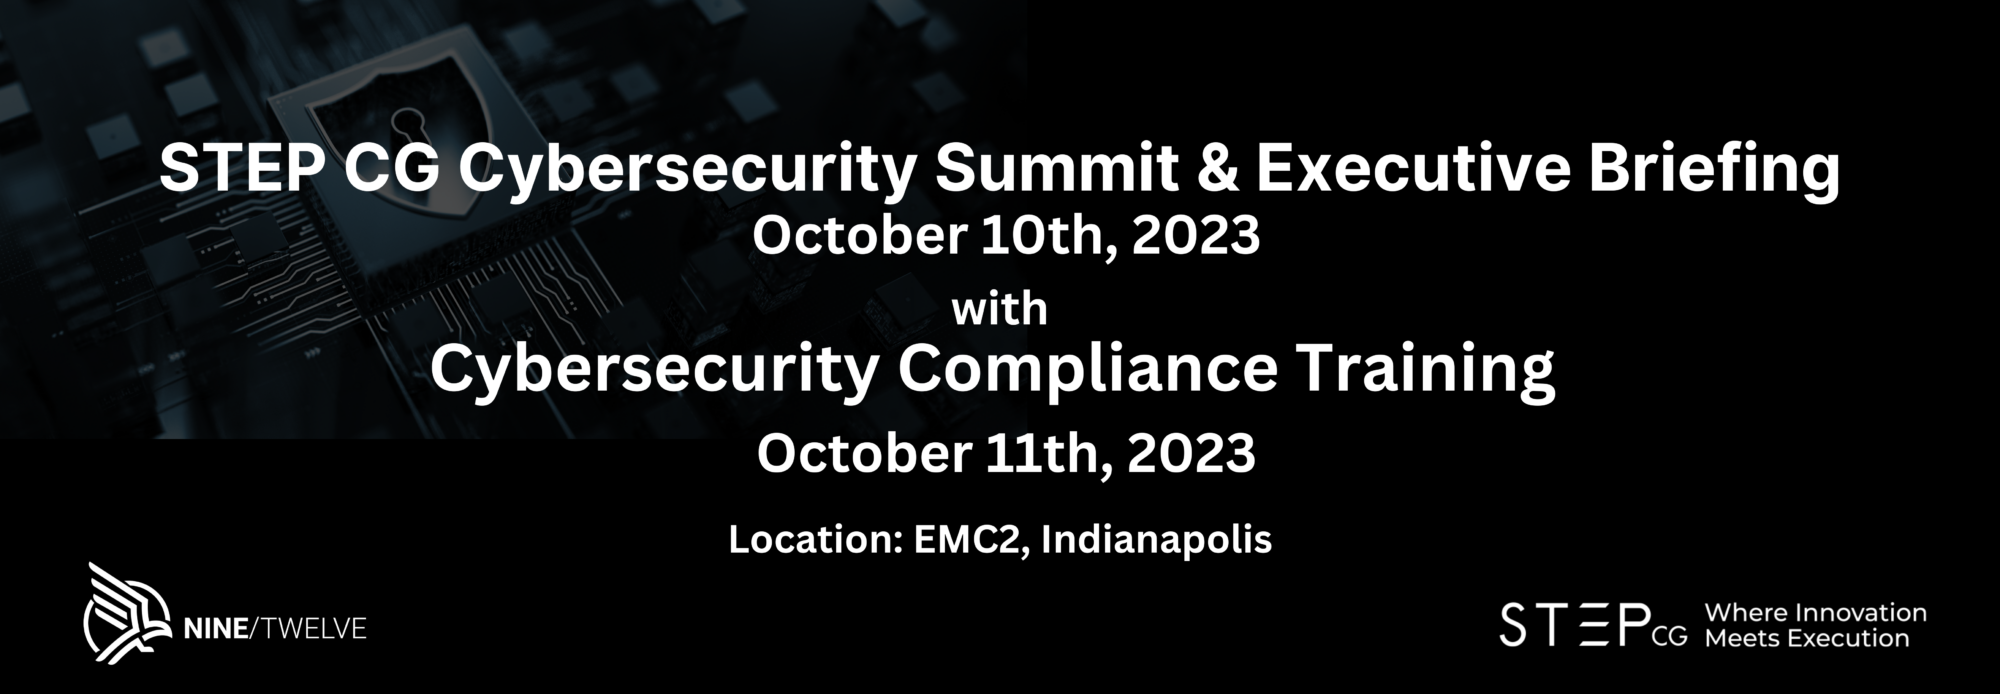 STEP CG Cybersecurity Summit and Executive Briefing at EMC2